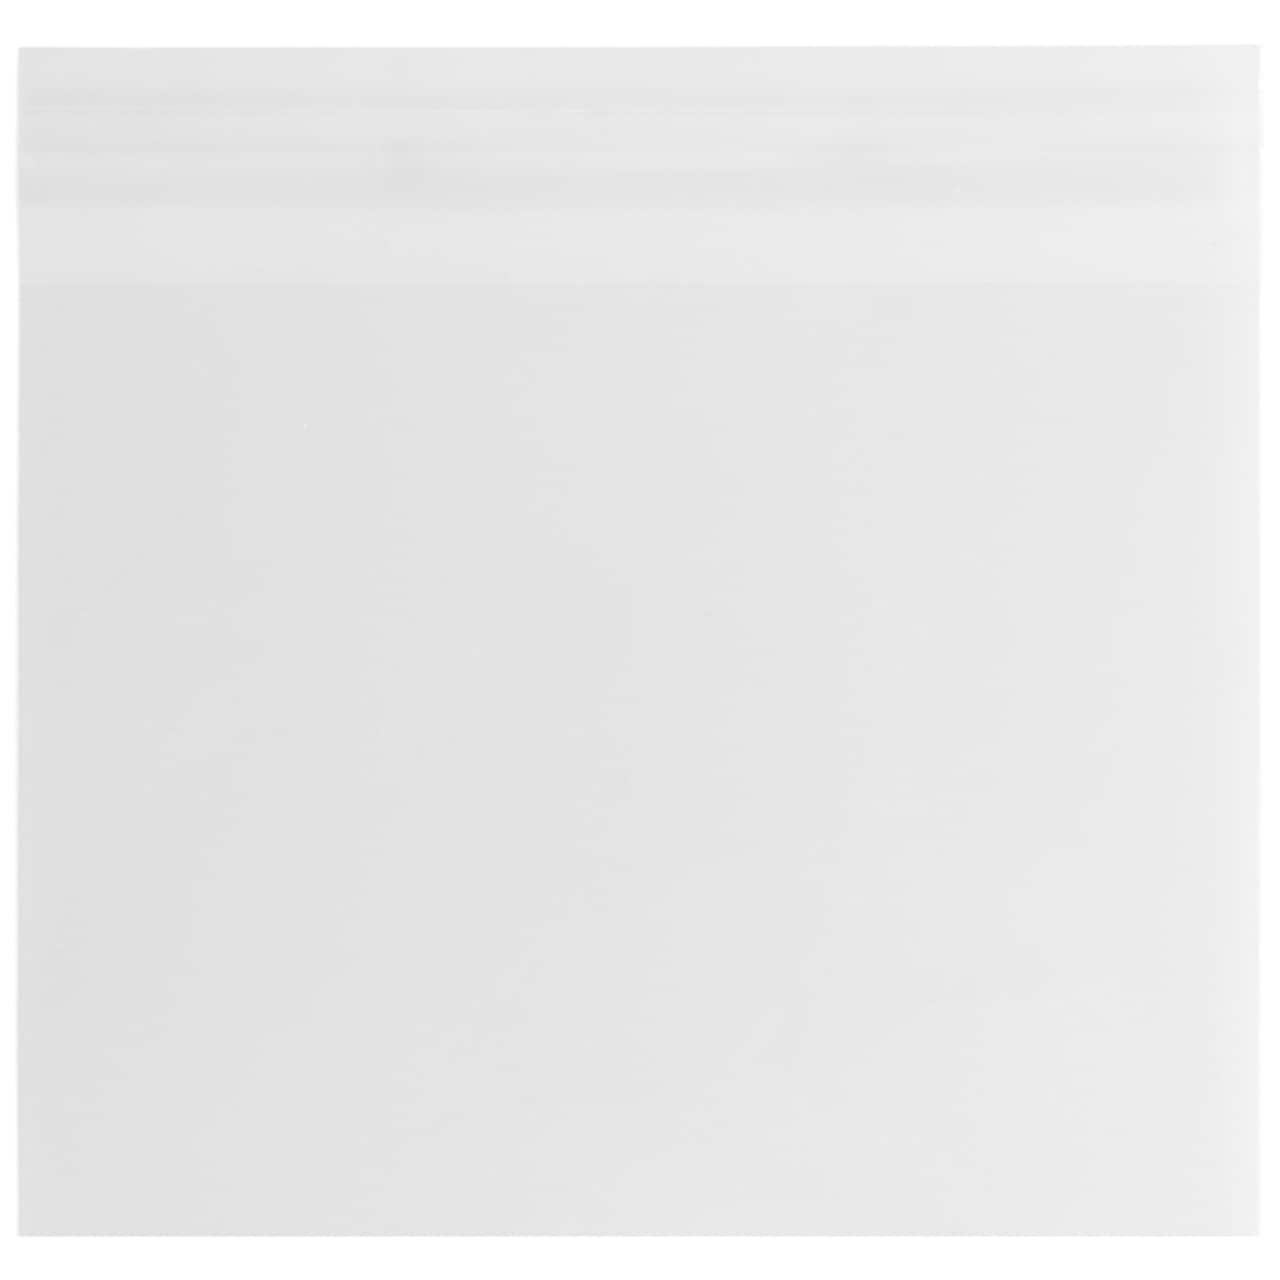 JAM Paper Clear Cello Sleeves With Self Adhesive Closure, 100ct.